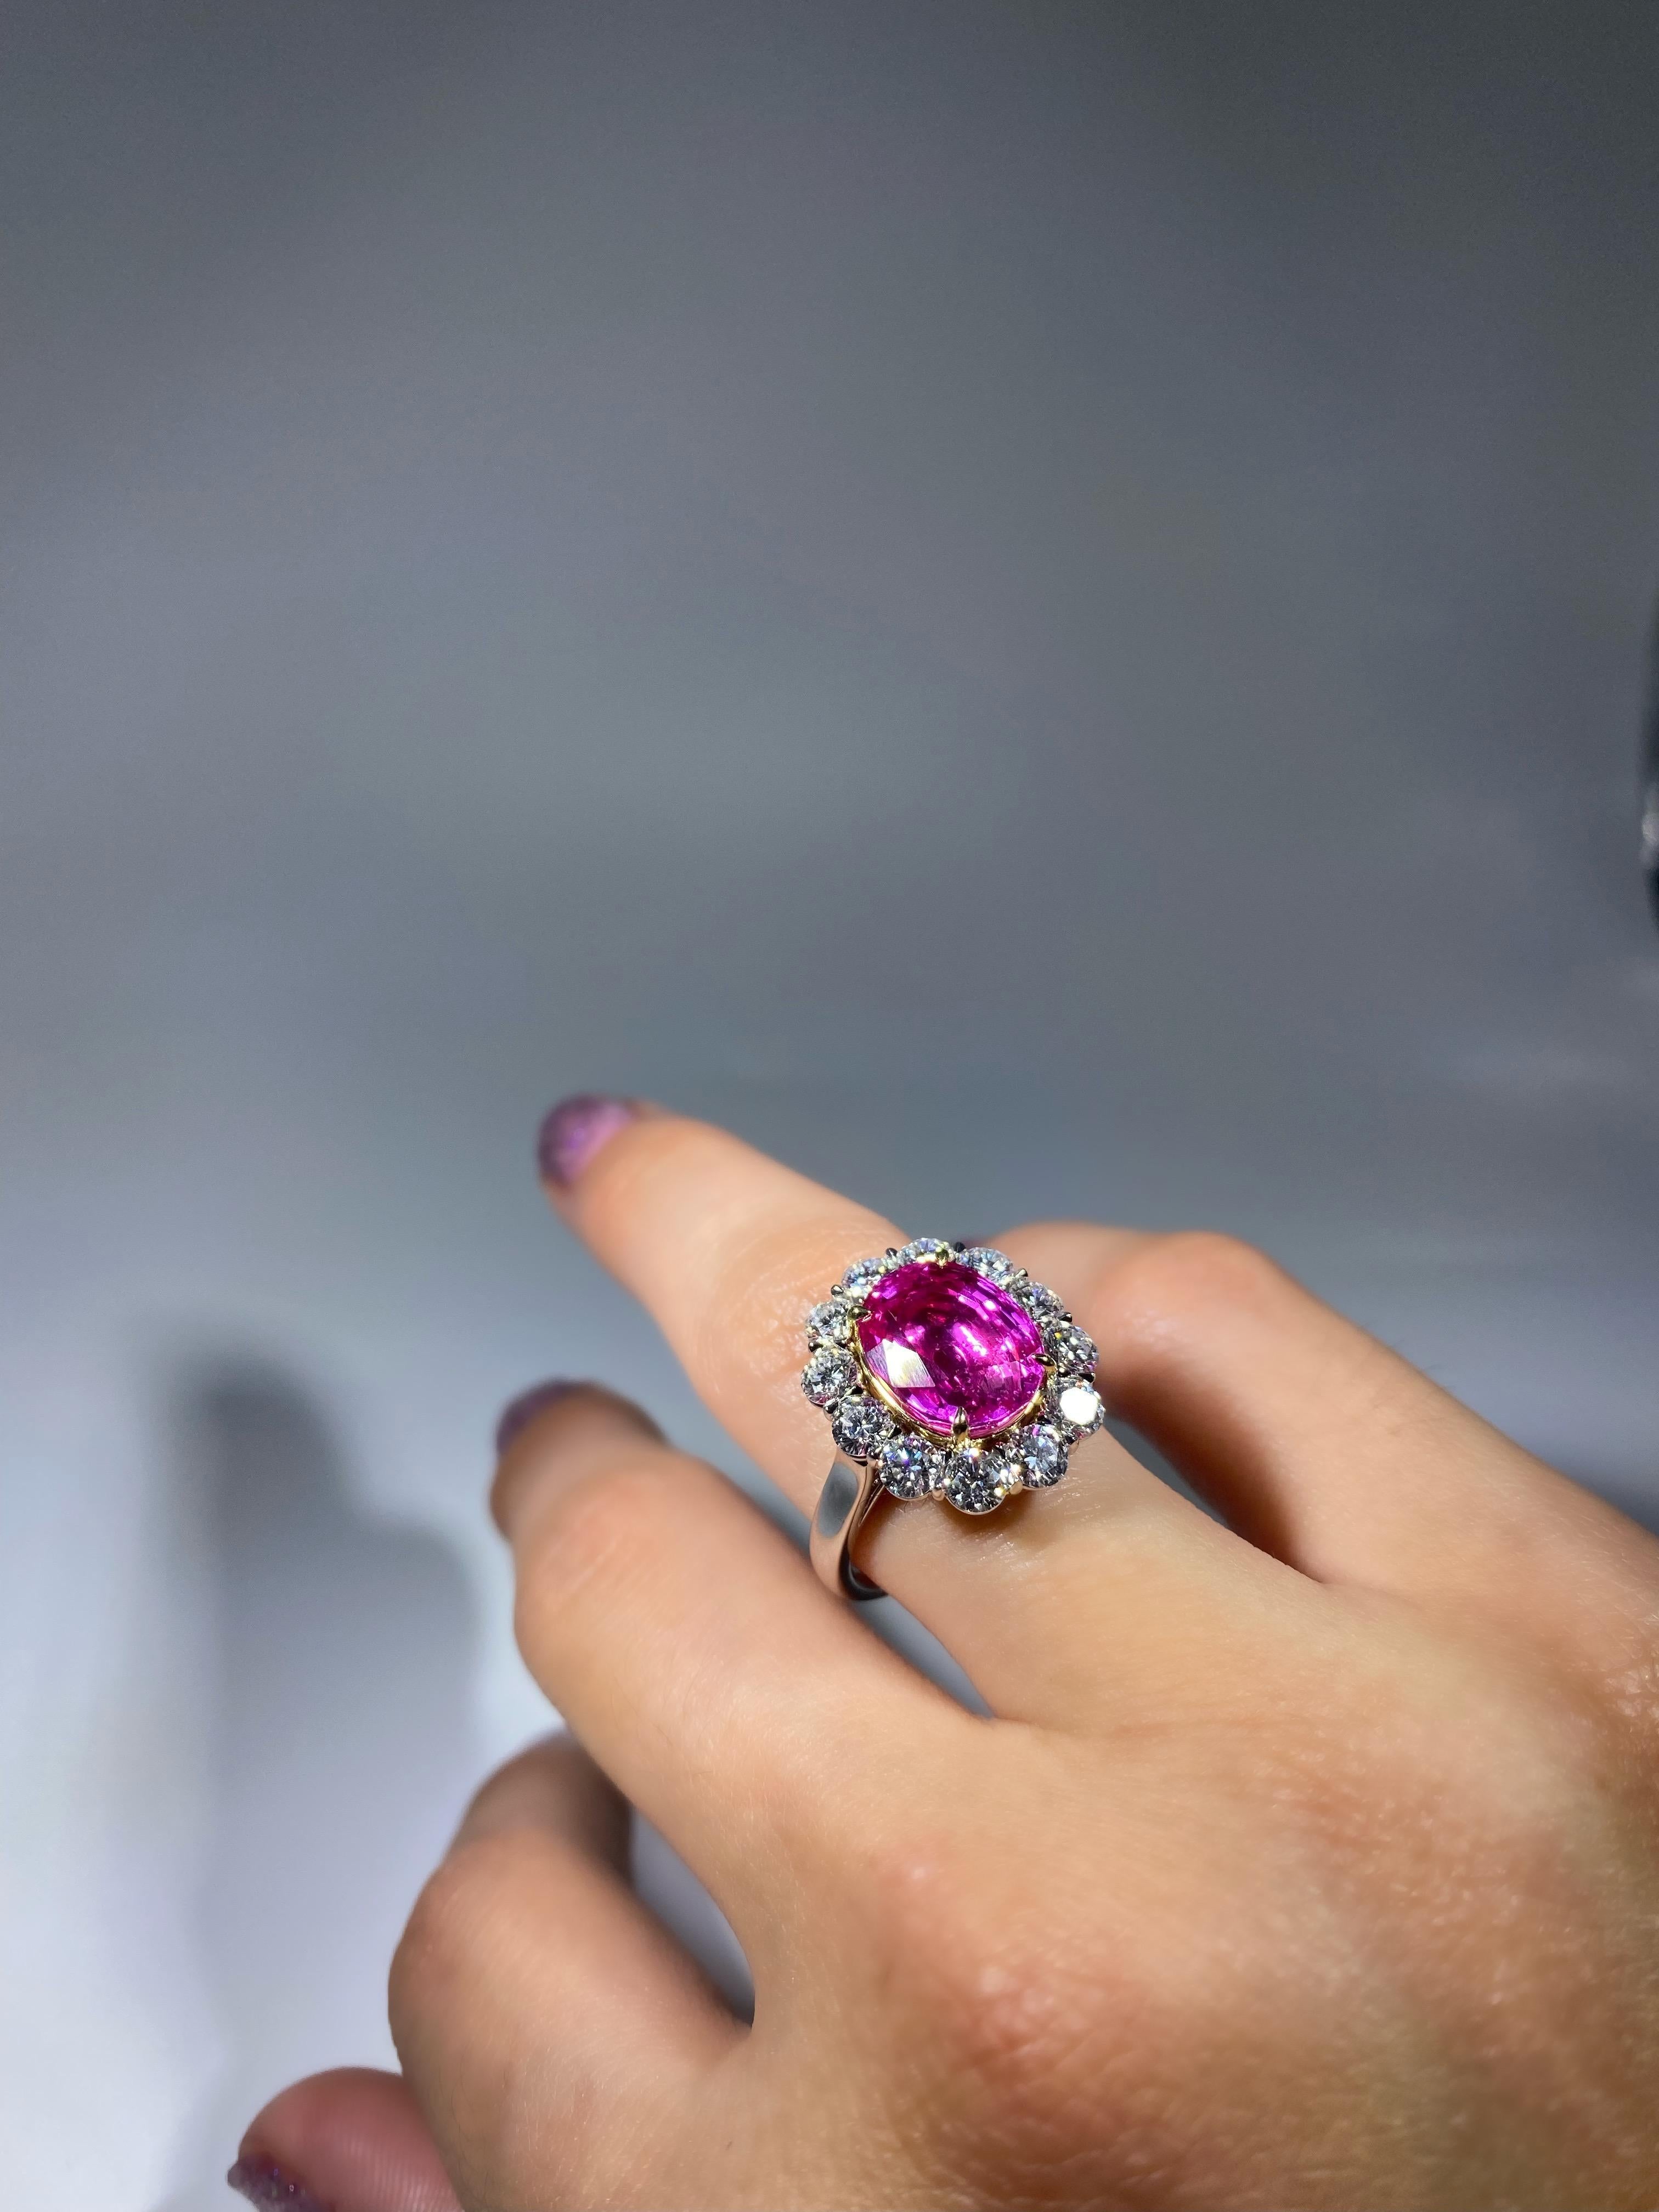 6.25 Carat Natural Pink Sapphire (Burmese Origin), is encapsulated in a 1.72-carat diamond halo, made in 18K Gold. 

Gemstone Details
Pink Sapphire Details 
Shape Oval
Color Intense Pink with Violet Hues
Origin Burma
Treatment Unheated 
Size	6.25